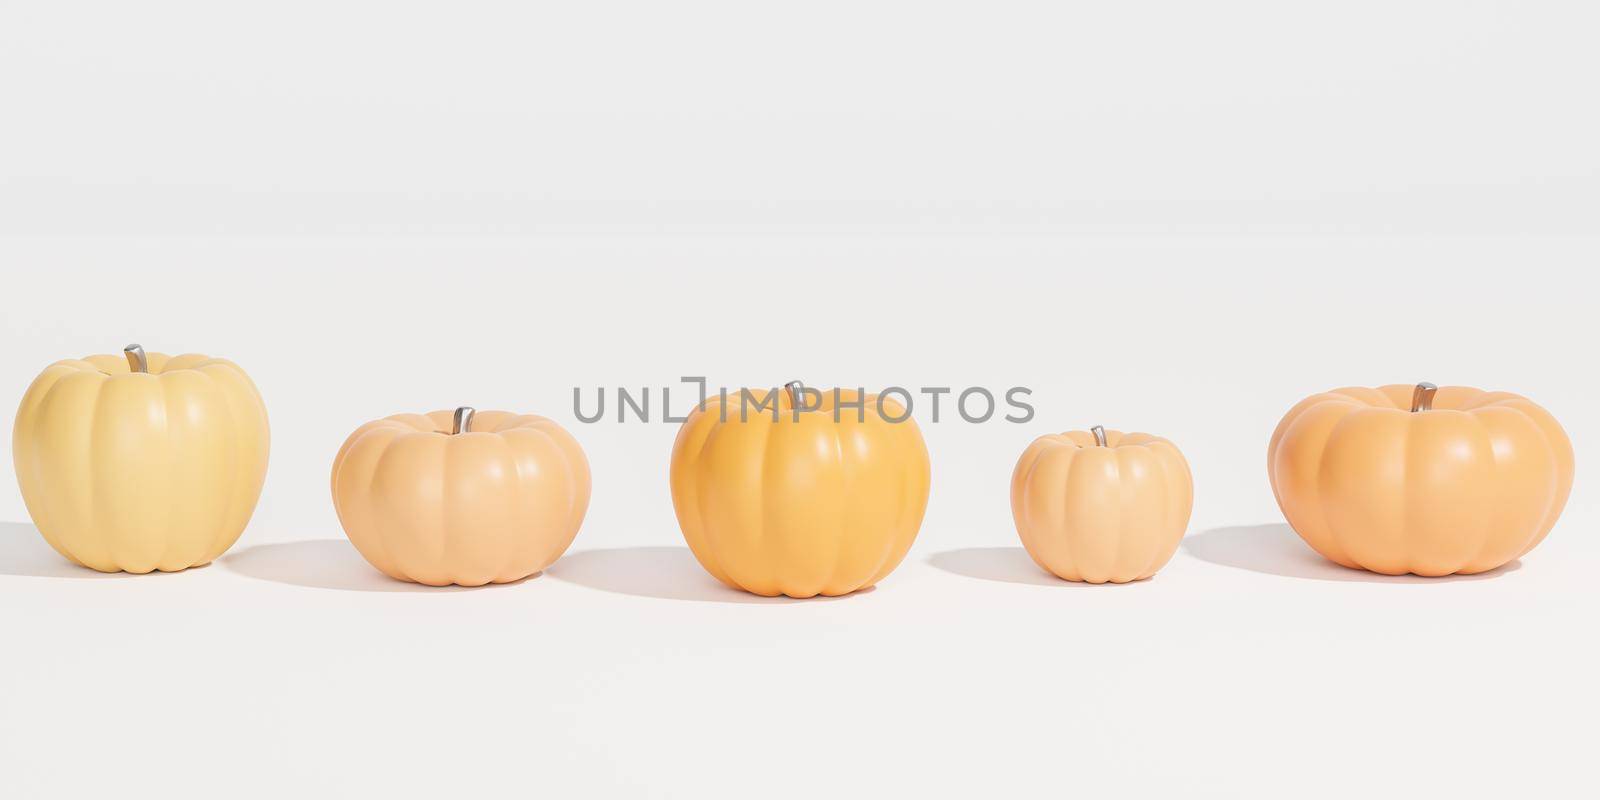 Pumpkins set on white background for advertising on autumn holidays or sales, 3d banner render by Frostroomhead